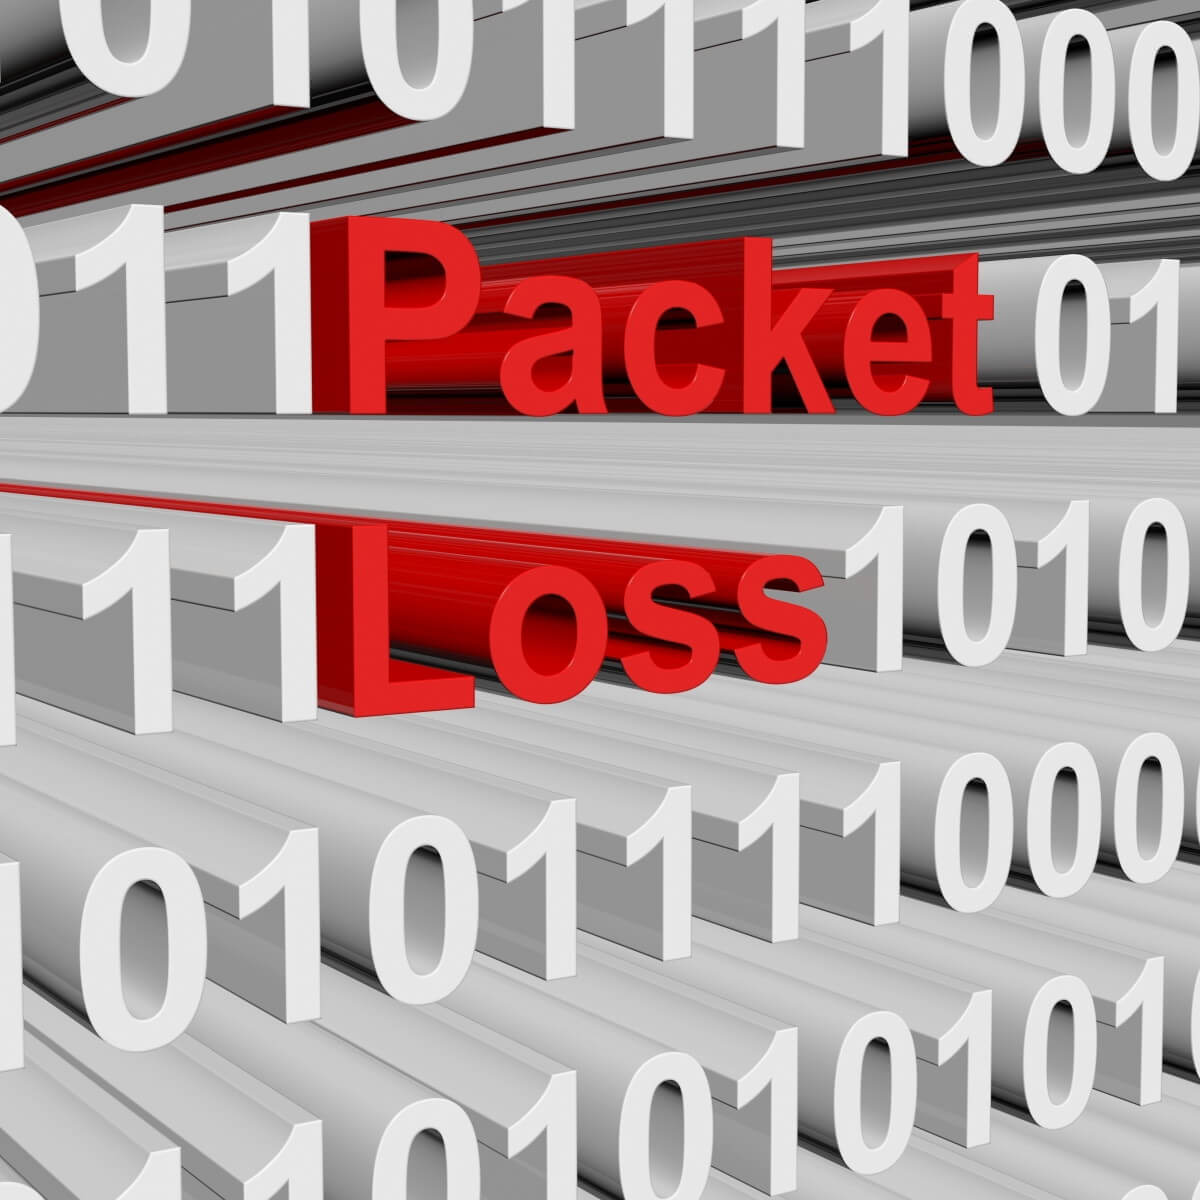 can a vpn help with packet loss?